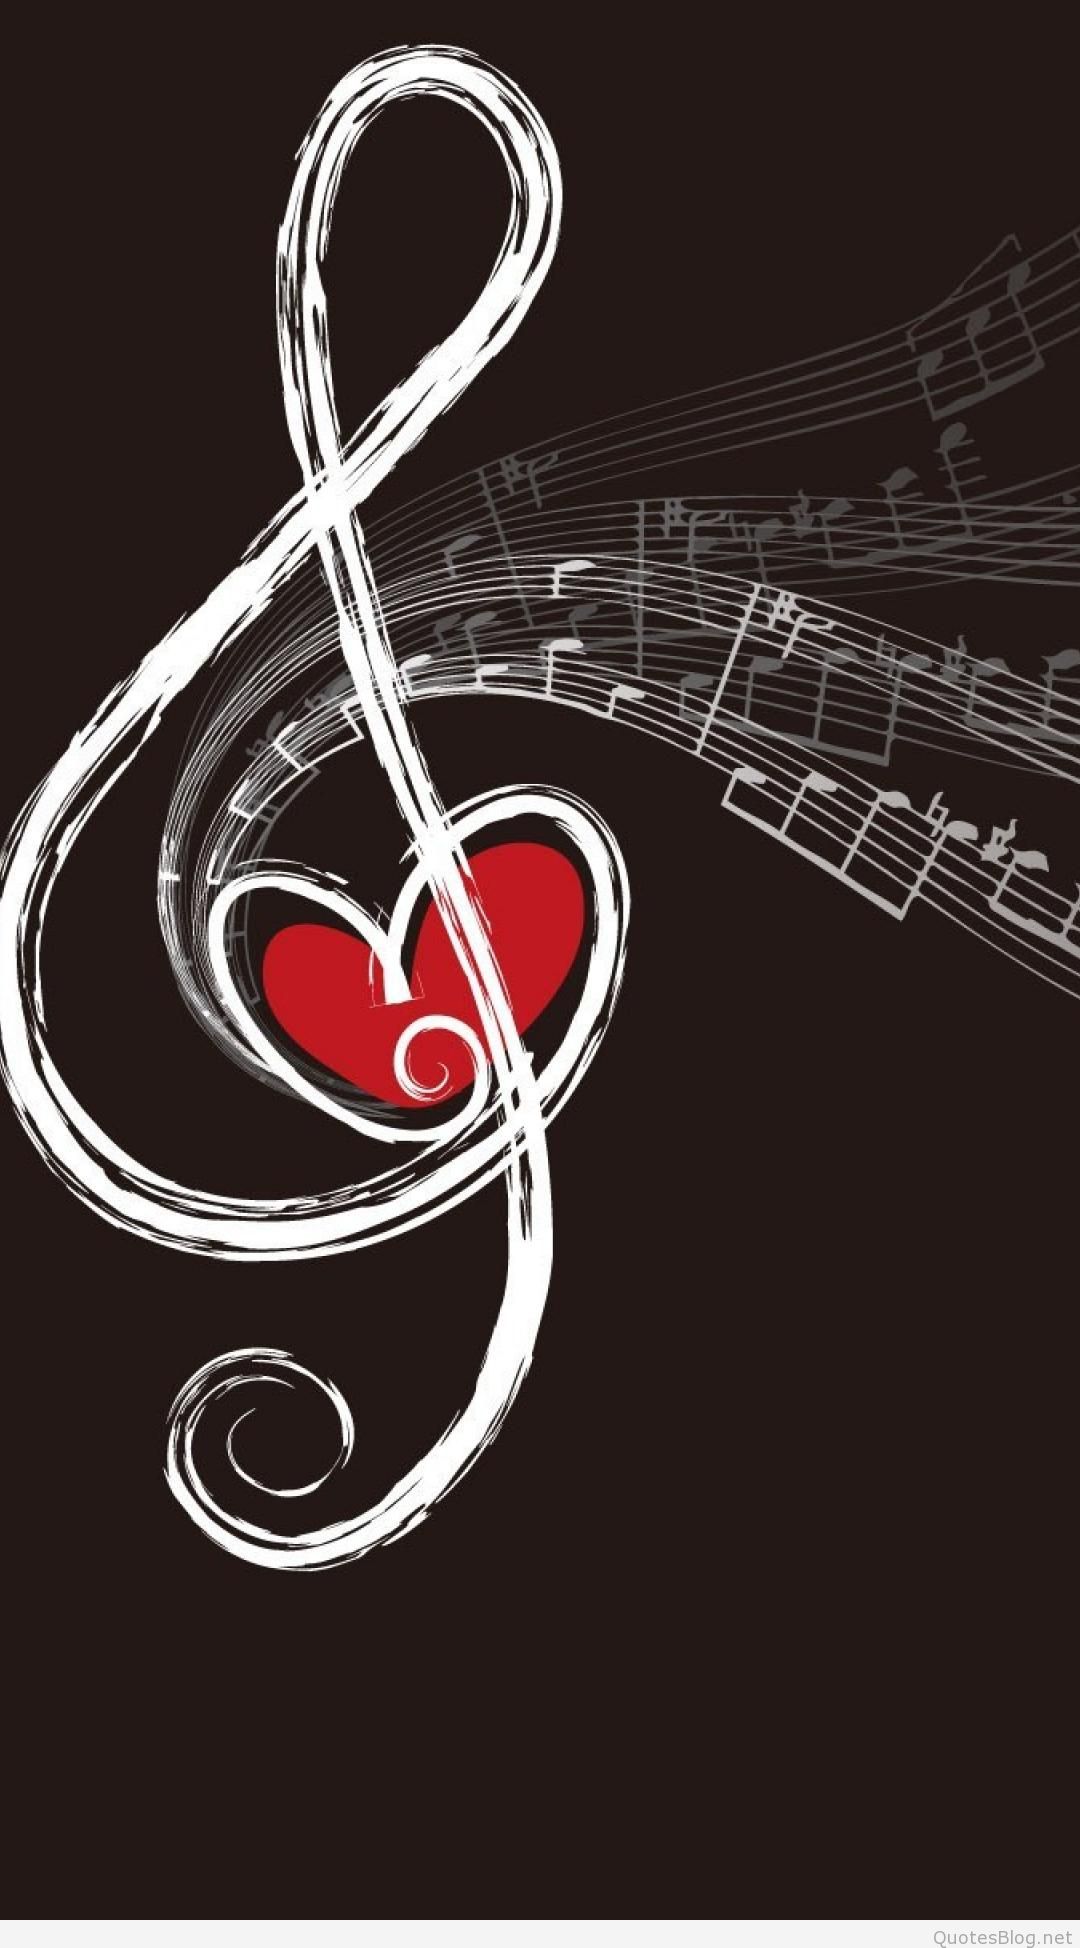 Love Wallpapers For Iphone Hd3 - Notas Musicales Con Corazon , HD Wallpaper & Backgrounds